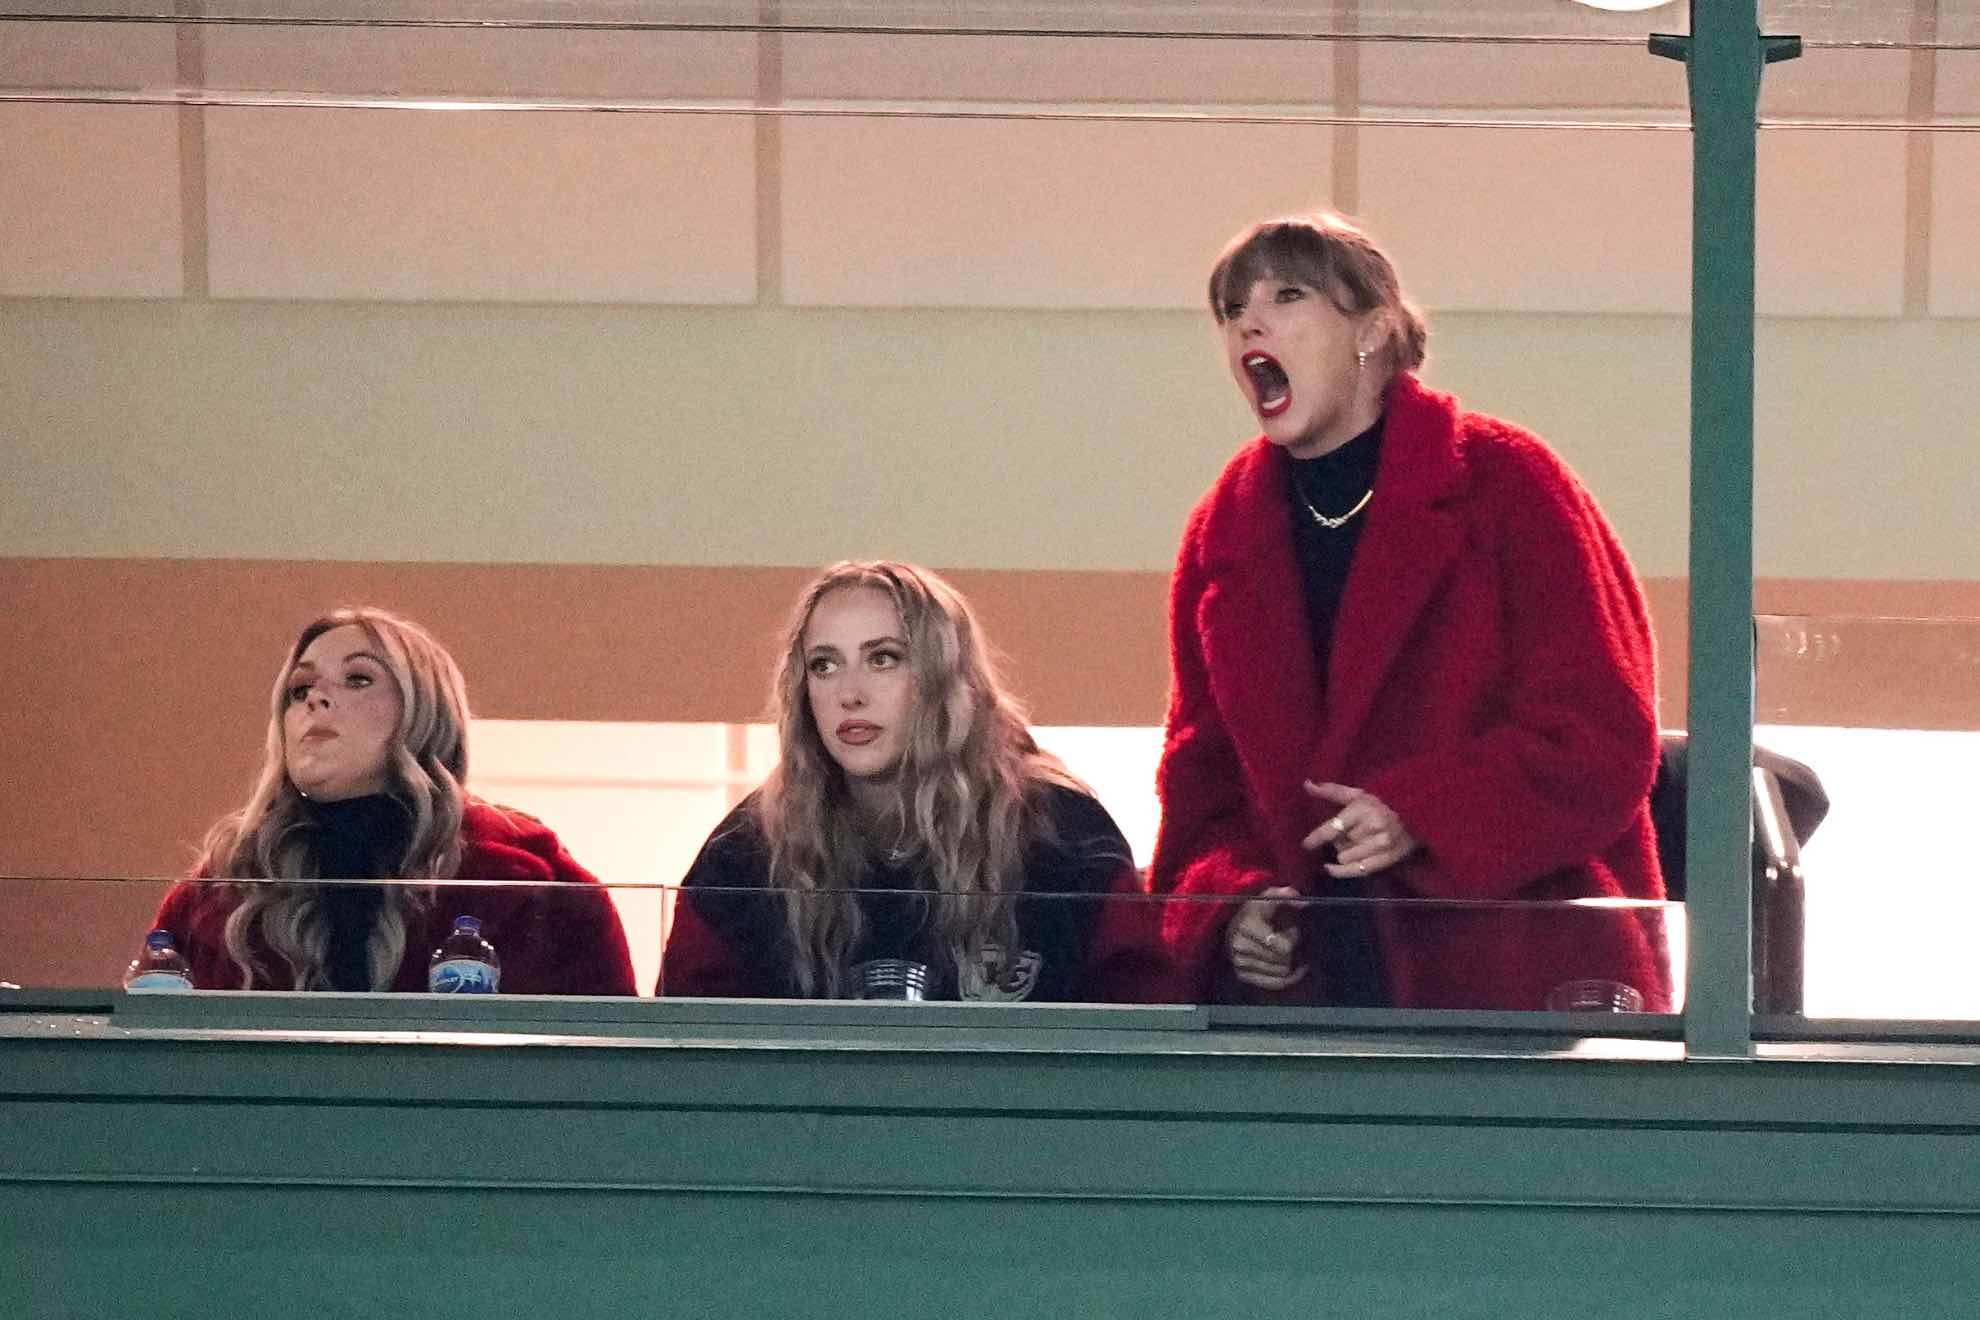 Taylor Swift cheers loudly for the Kansas City Chiefs